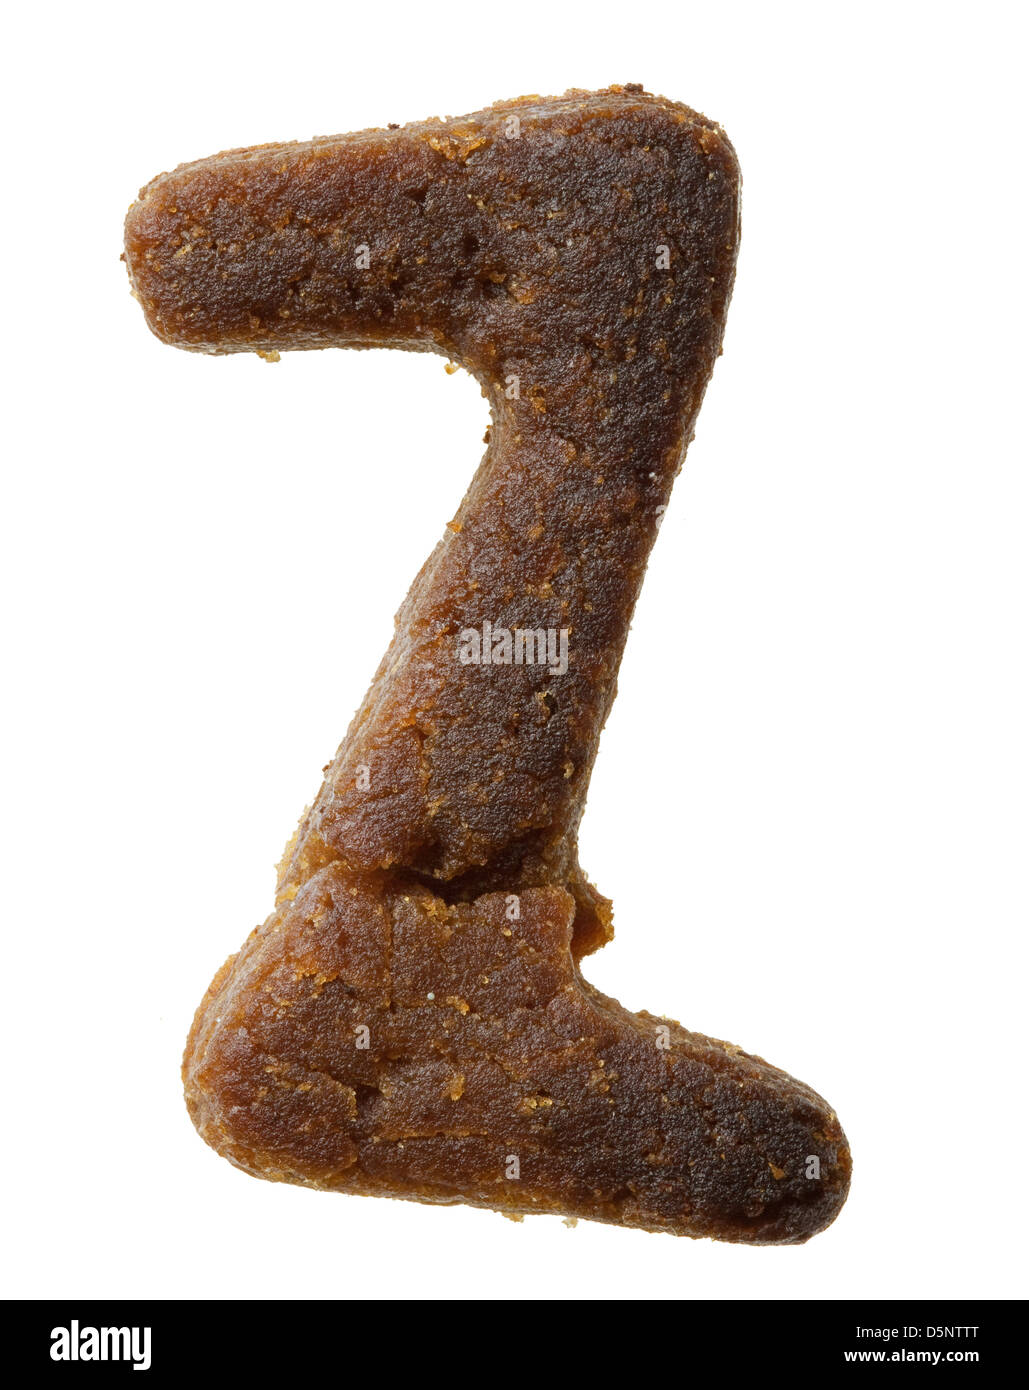 Baked alphabet cookie letter Z Stock Photo